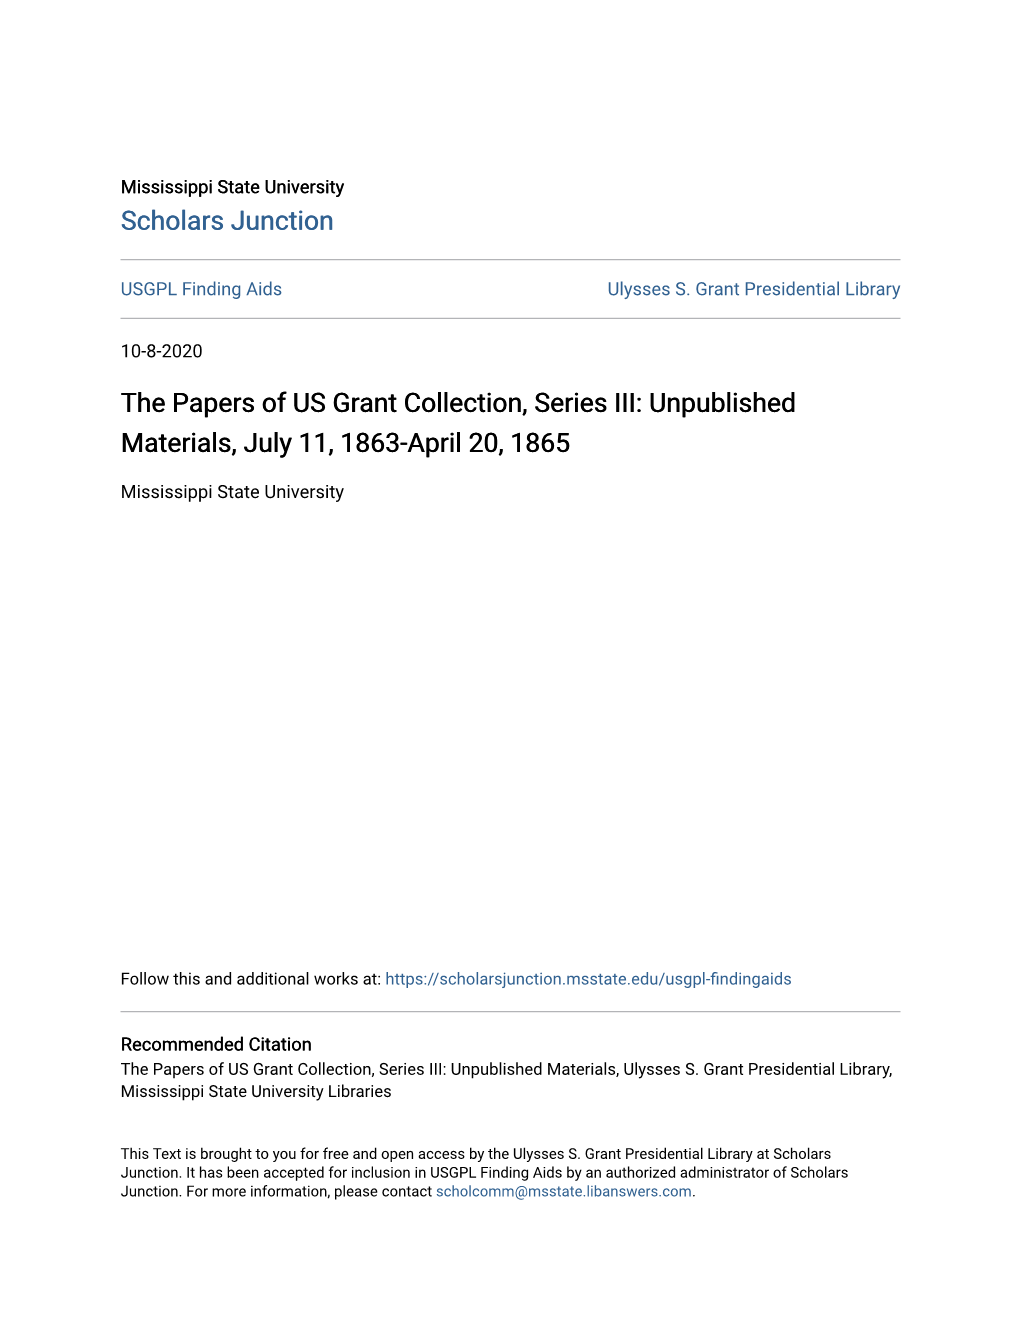 The Papers of US Grant Collection, Series III: Unpublished Materials, July 11, 1863-April 20, 1865